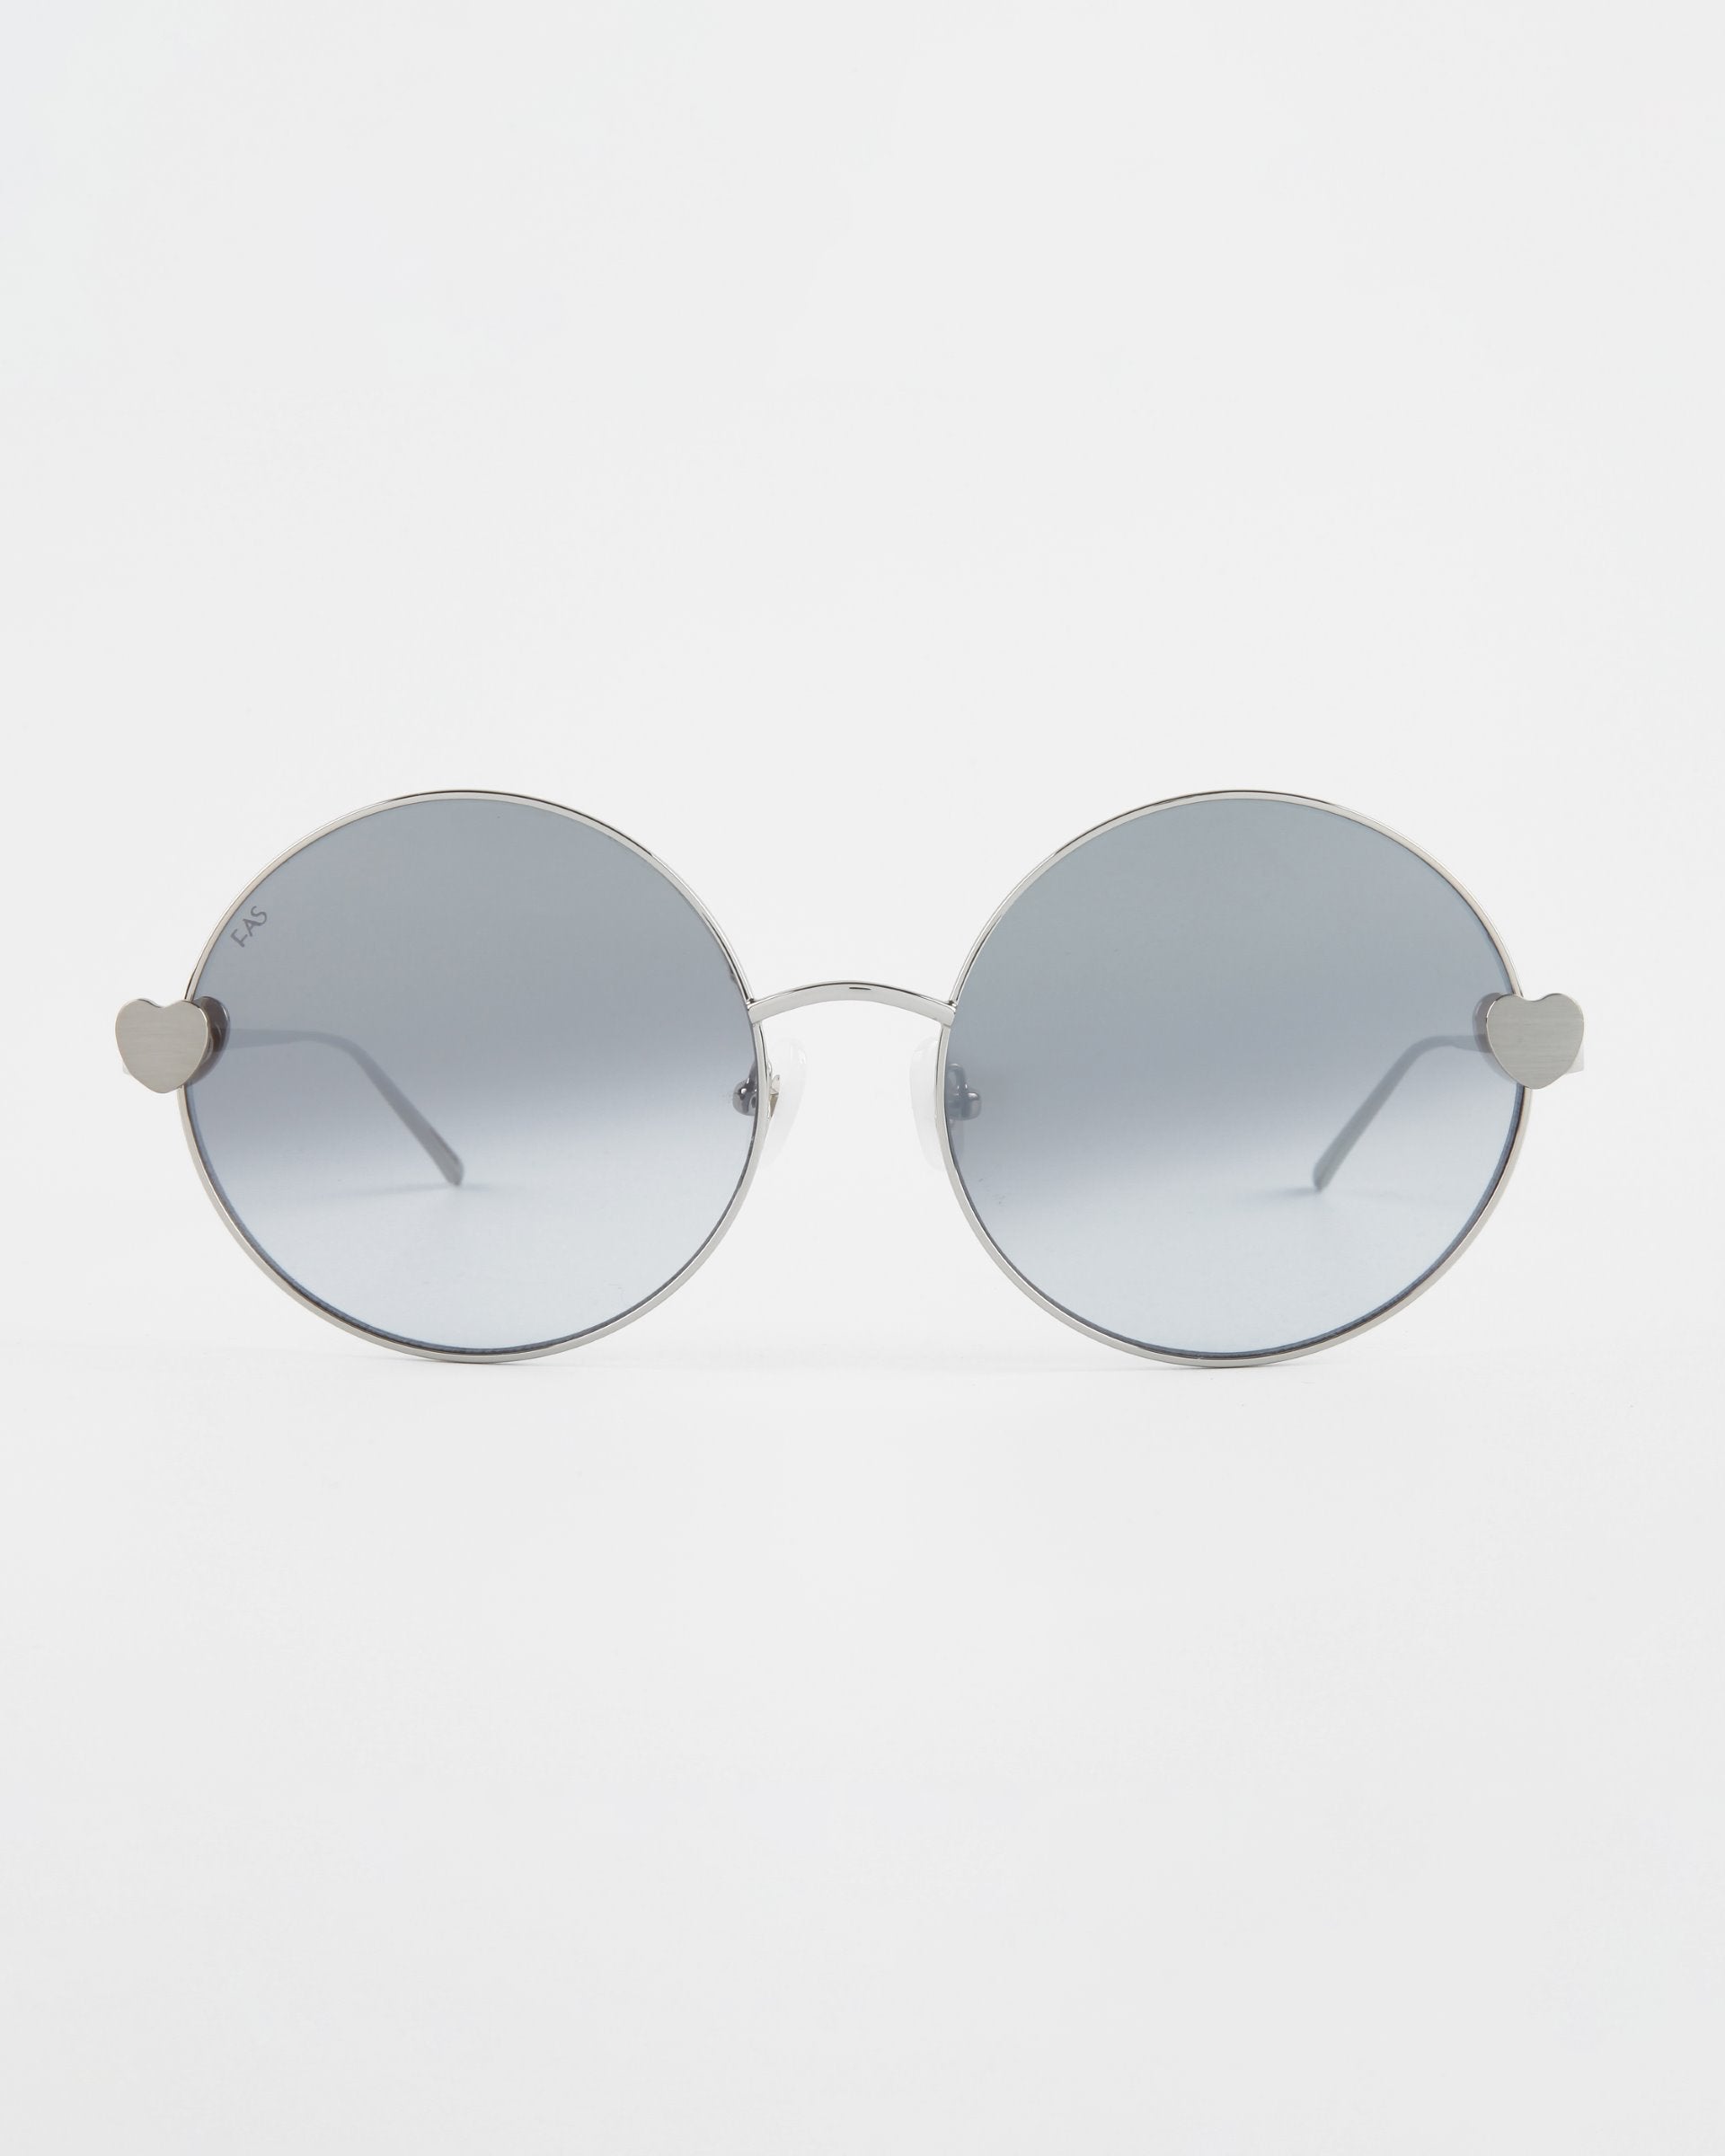 A pair of round For Art&#39;s Sake® Love Story shades with thin silver frames and grey-tinted lenses. The hinges on both sides are in the shape of small hearts, adding a unique and playful touch to the minimalist design. Equipped with jadestone nose pads, they also offer 100% UV protection against harmful rays. The background is plain white.